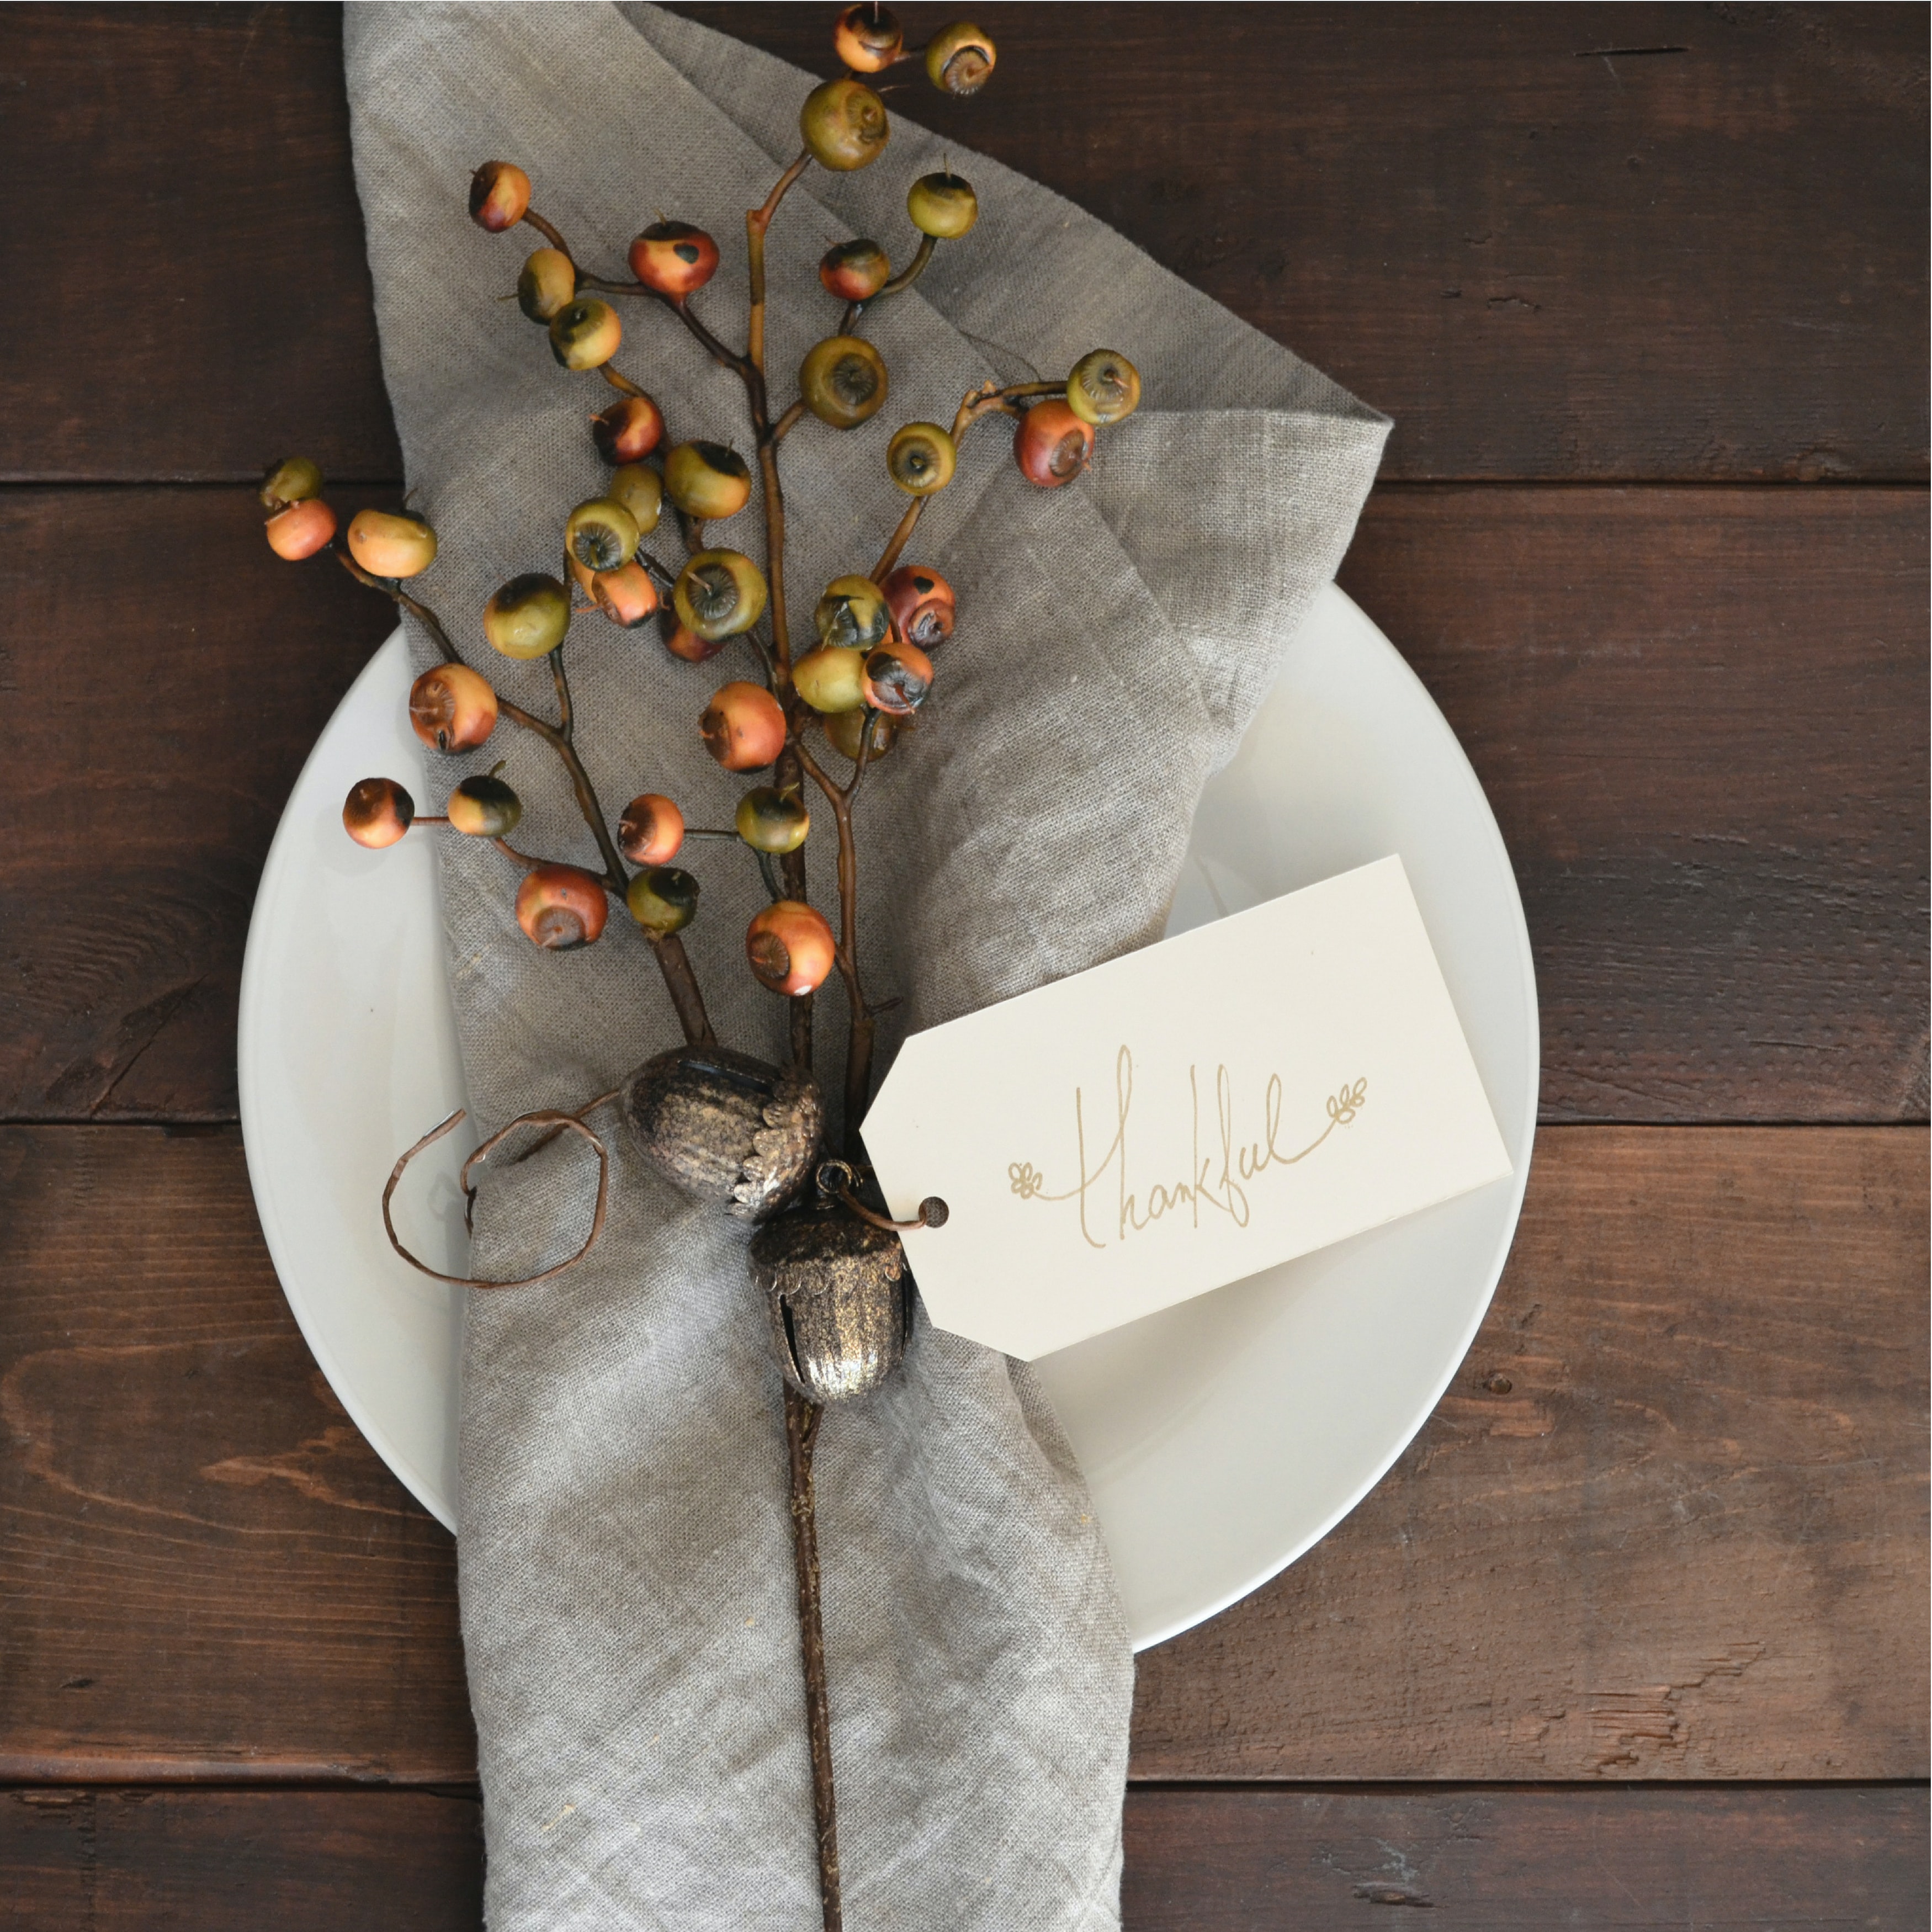 Plate with "Thankful" napkins